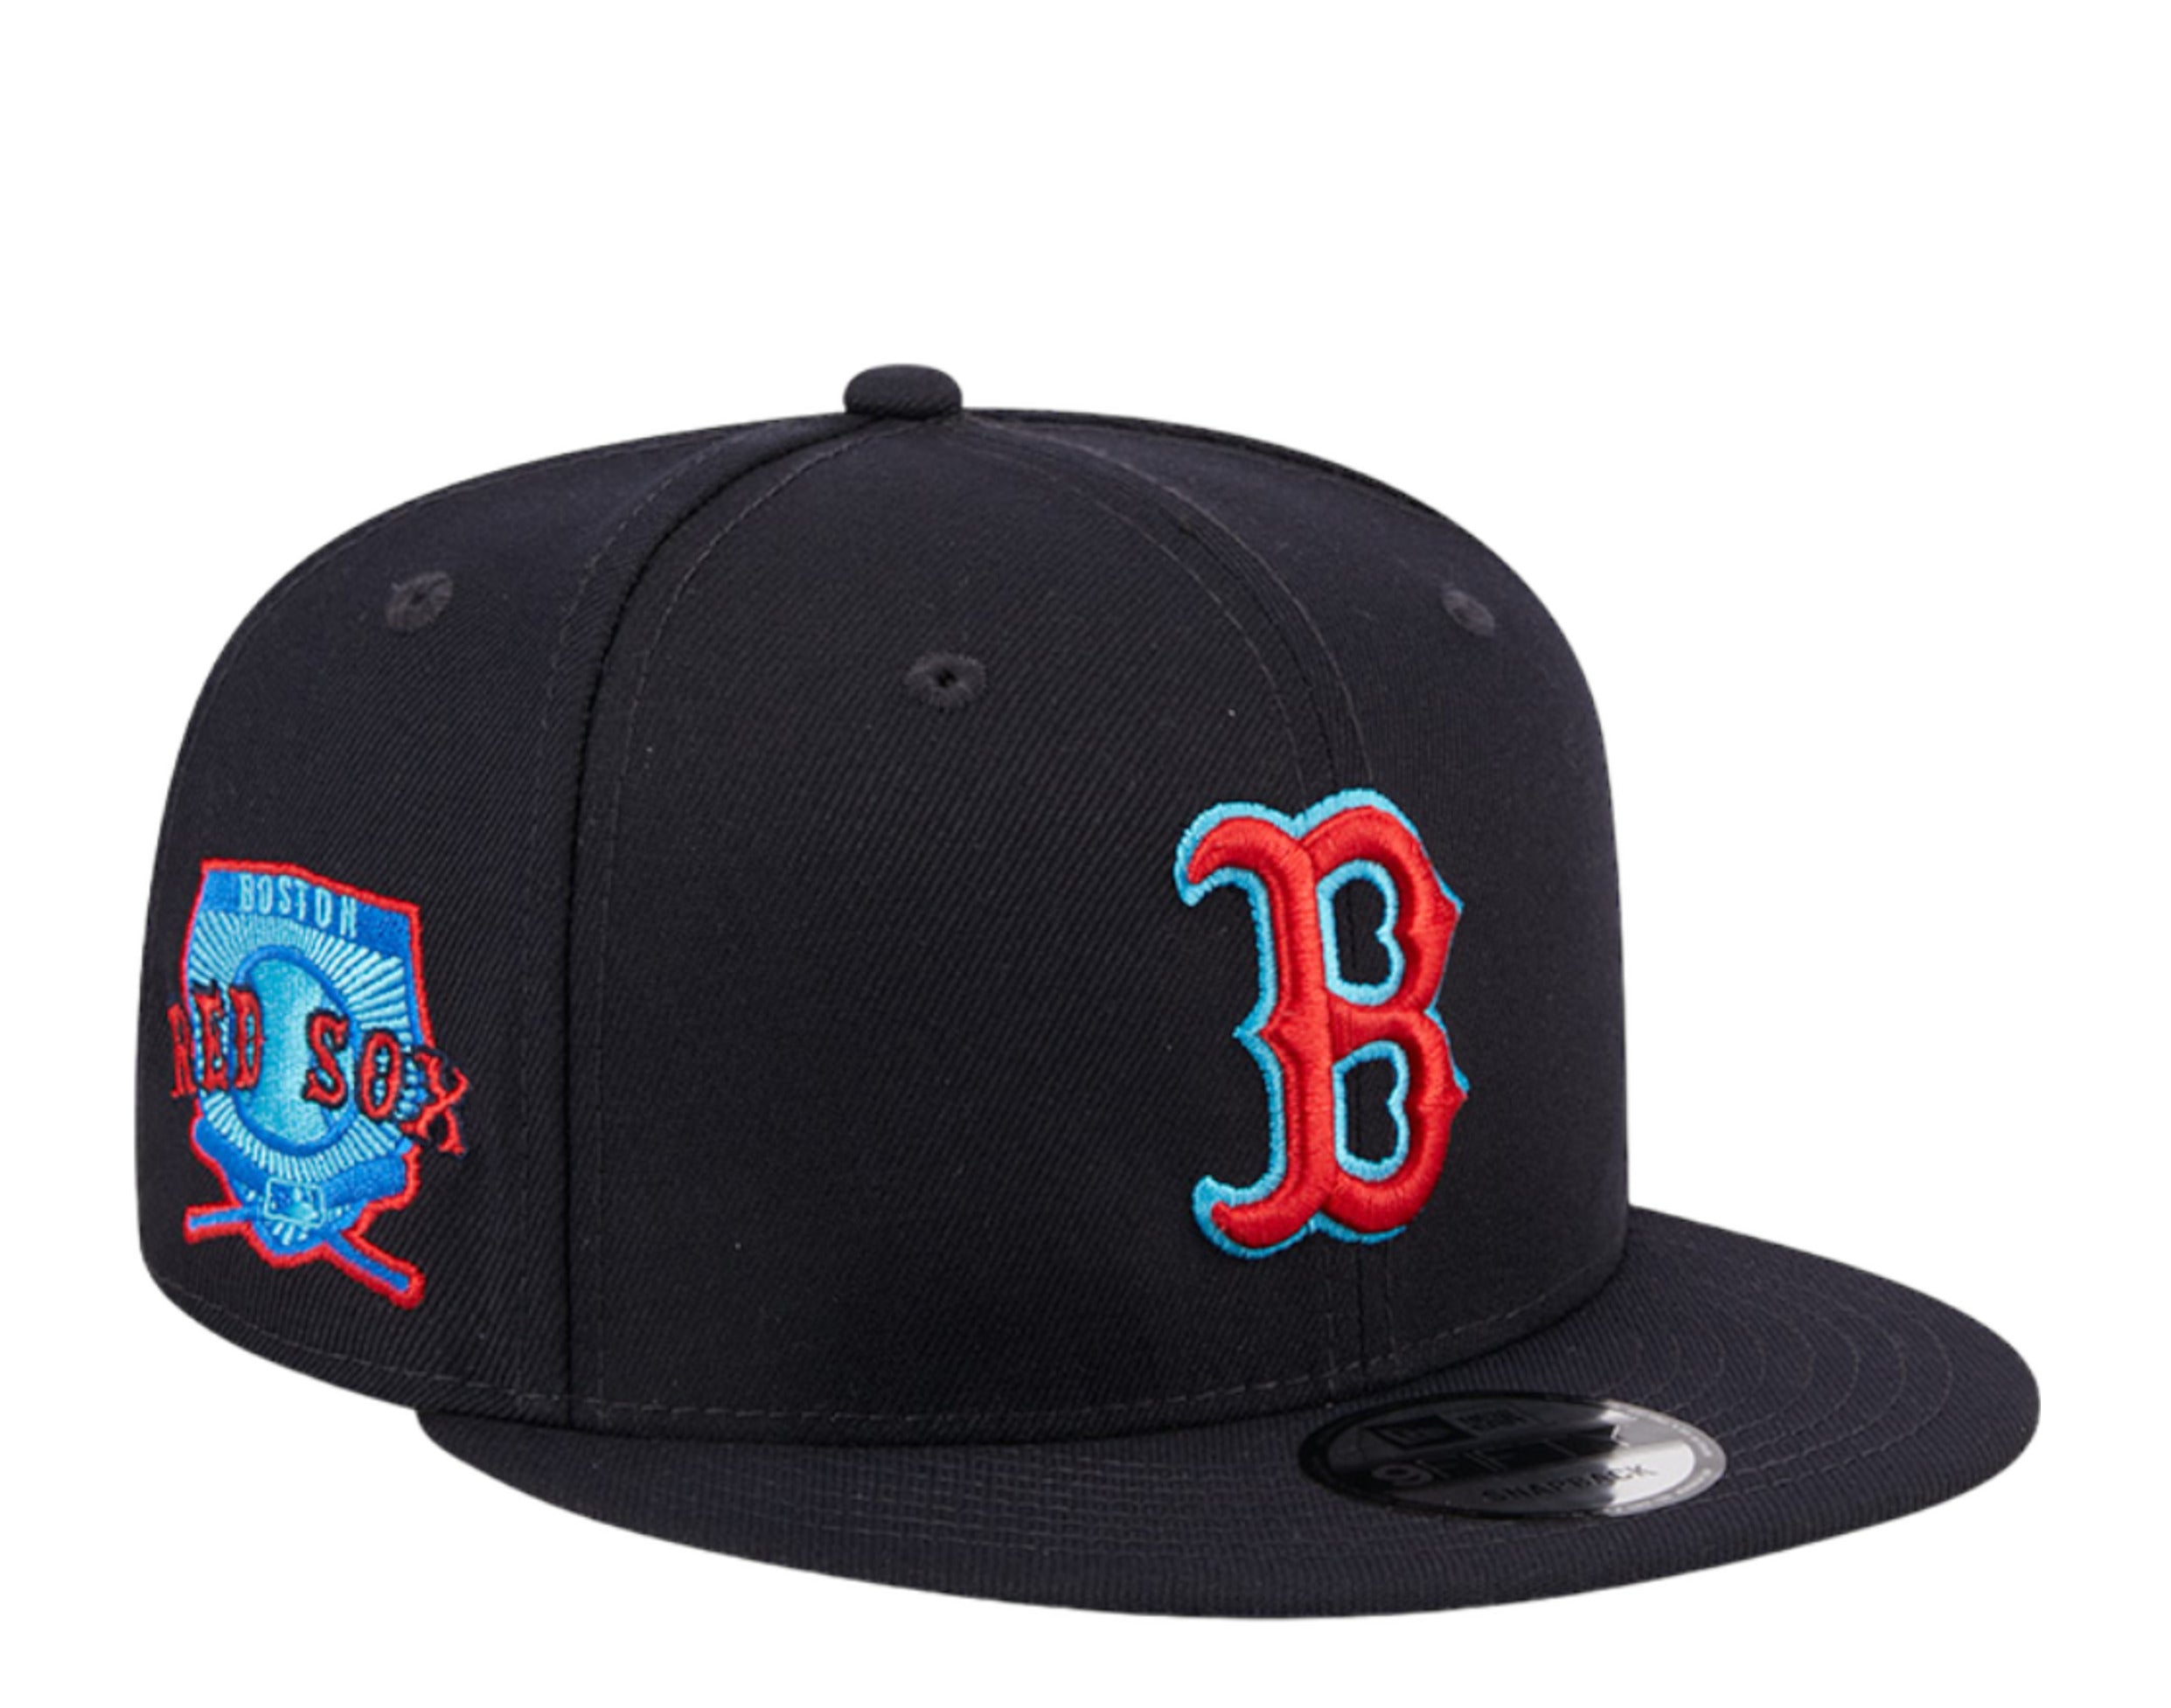 New Era Red Sox 5950 Retro Fitted Cap